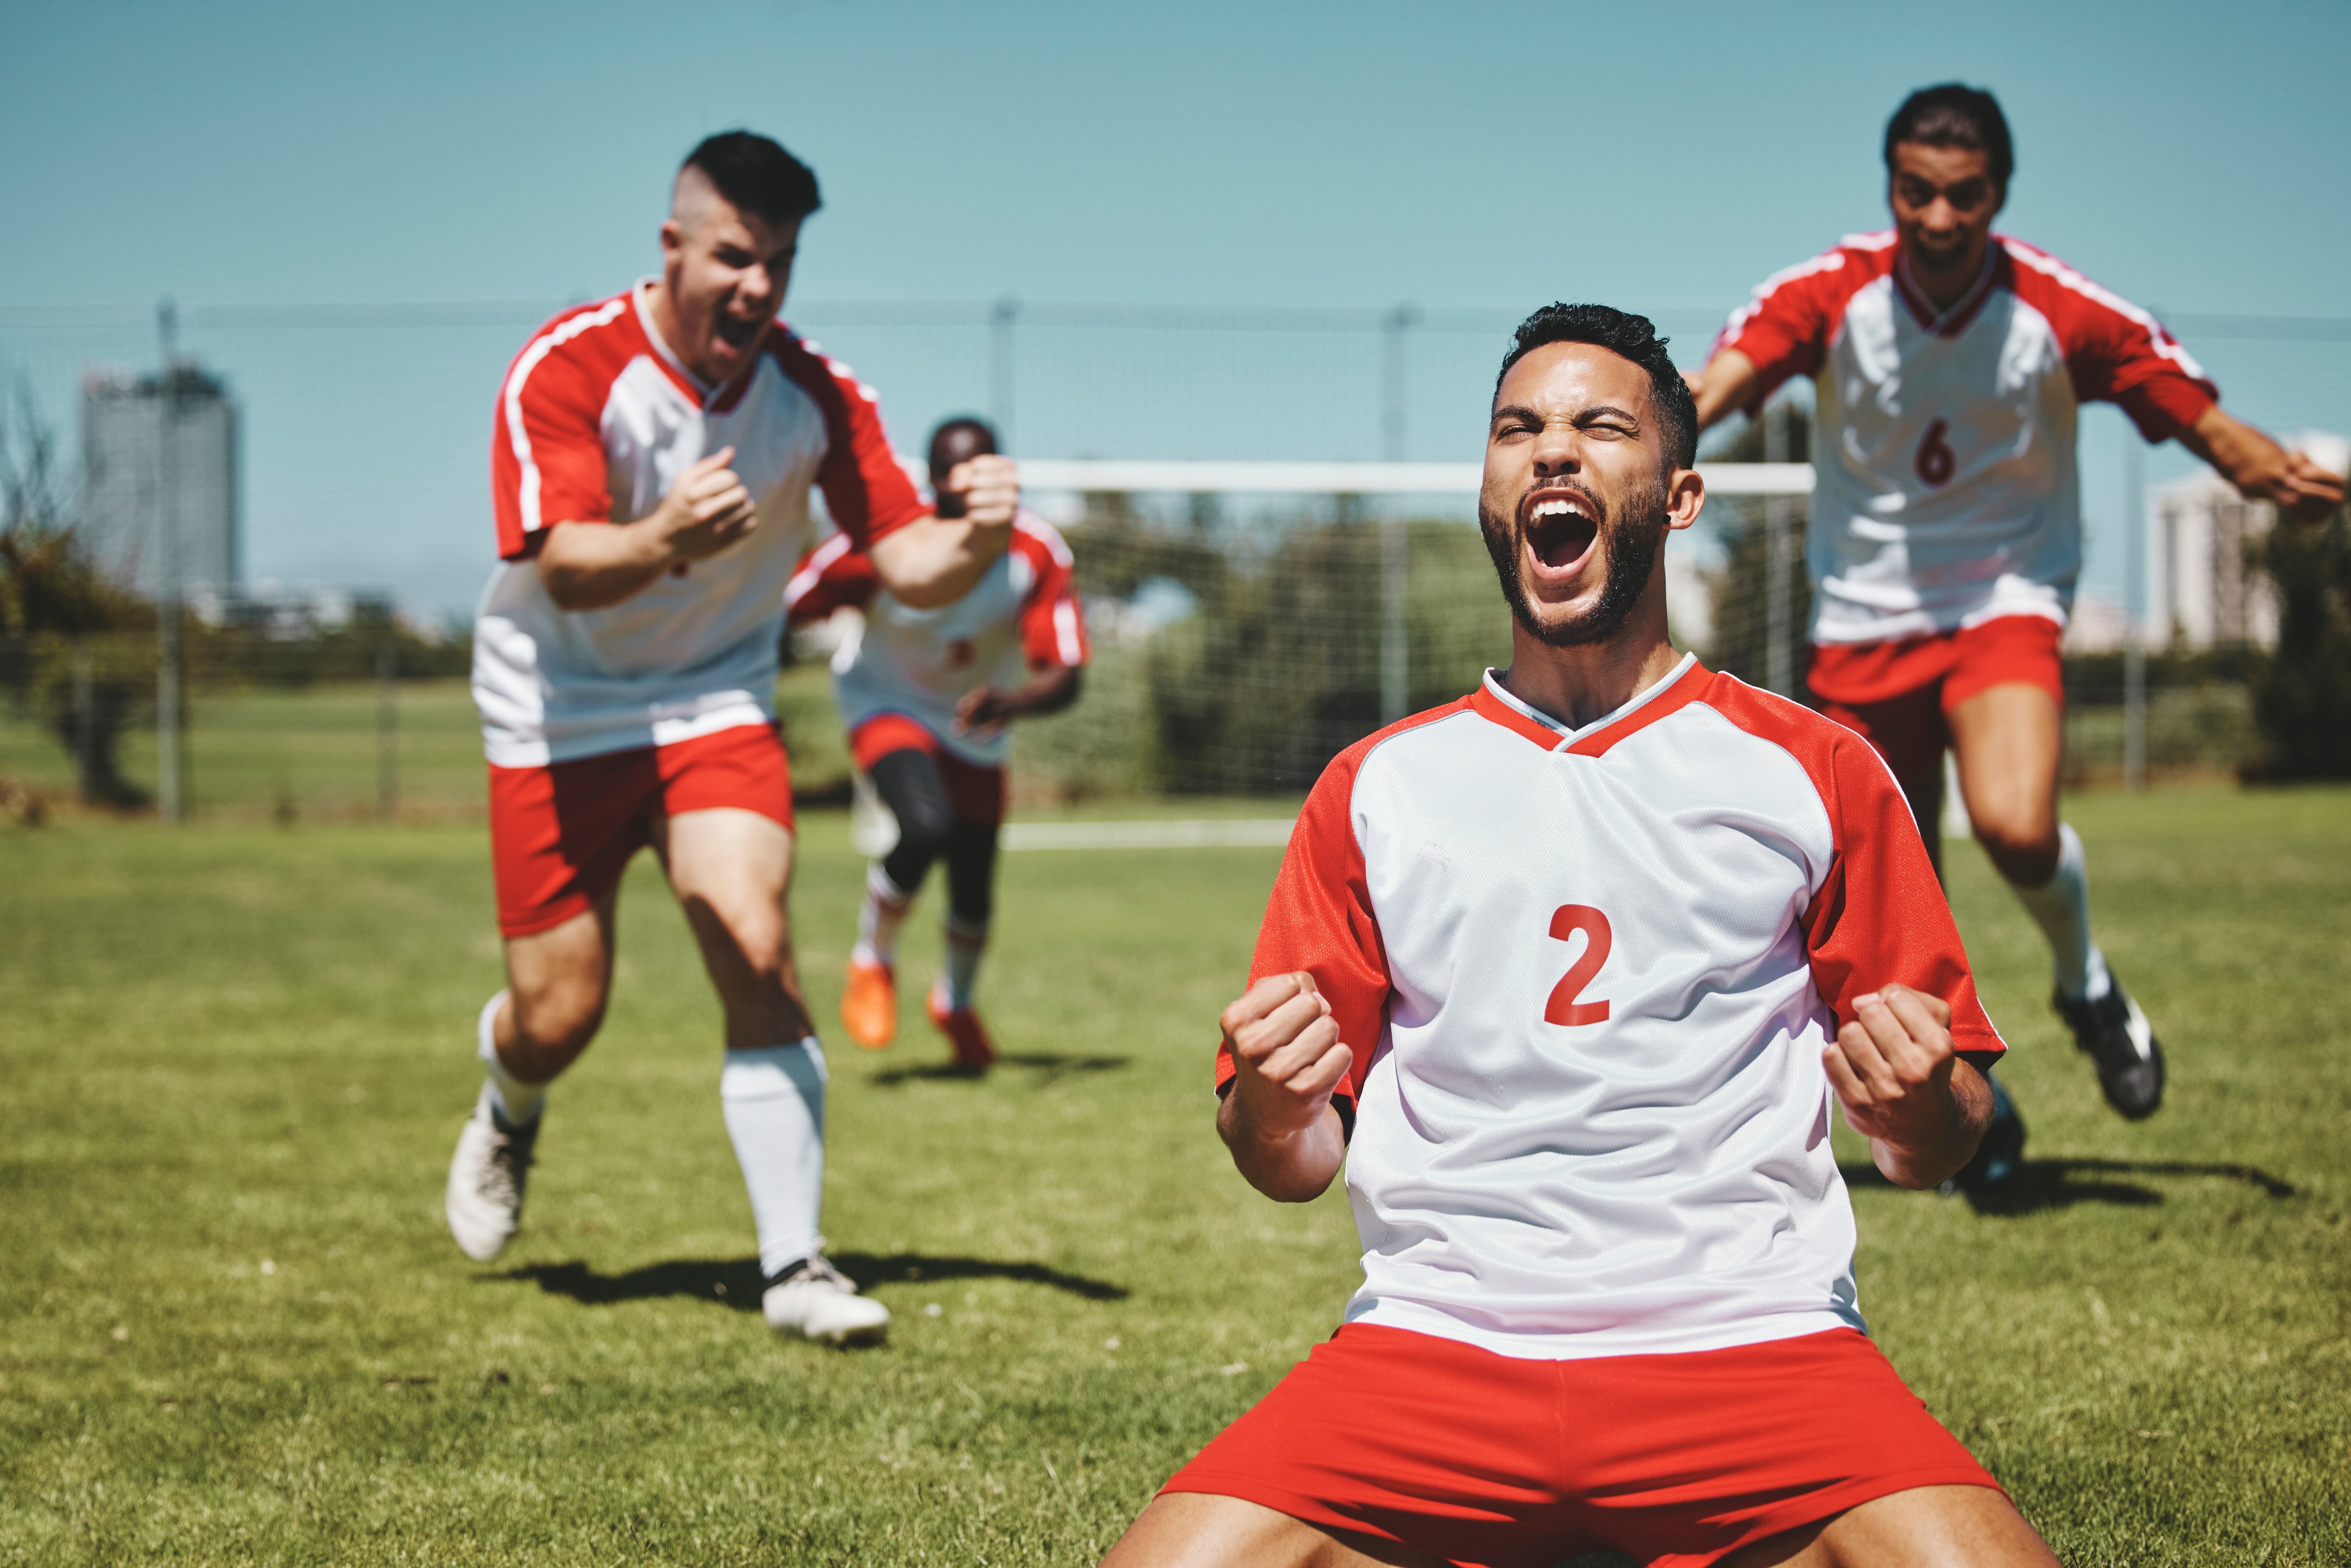 The Ultimate Football Equipment Checklist for Grassroots Training Sessions  - The Soccer Store Blog